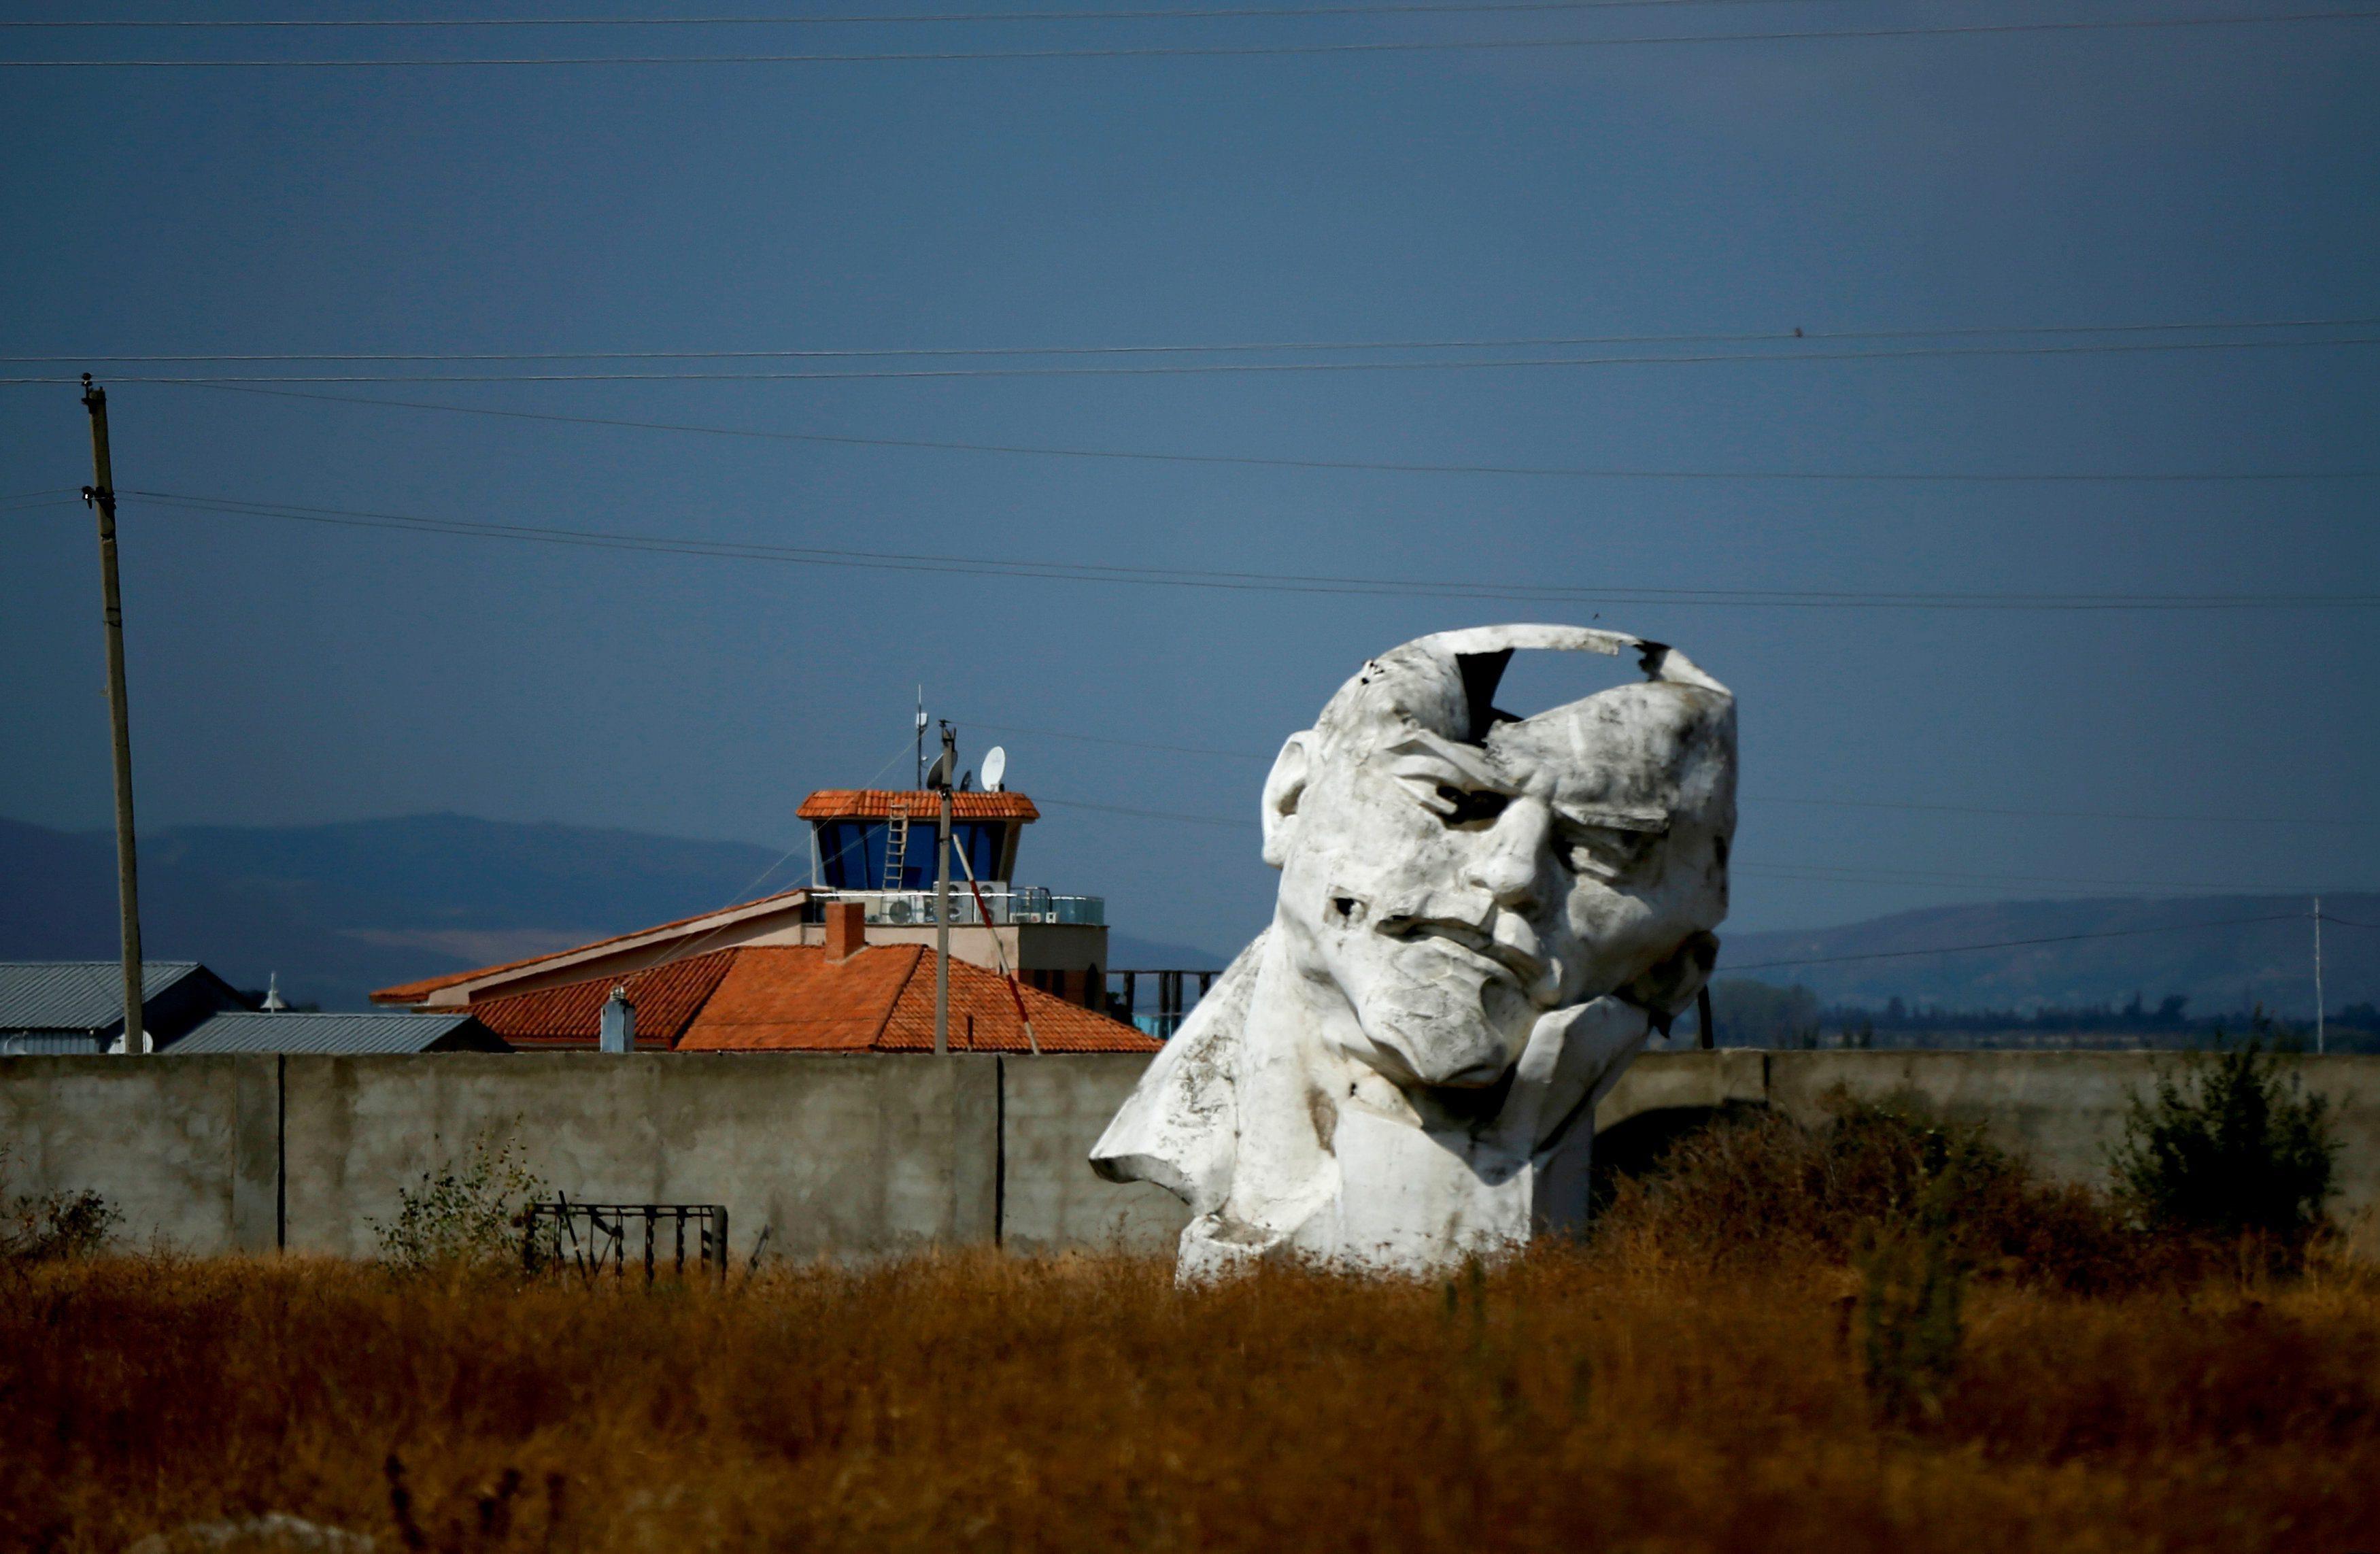 The Wider Image: Monuments of Lenin 100 years after Russian Revolution